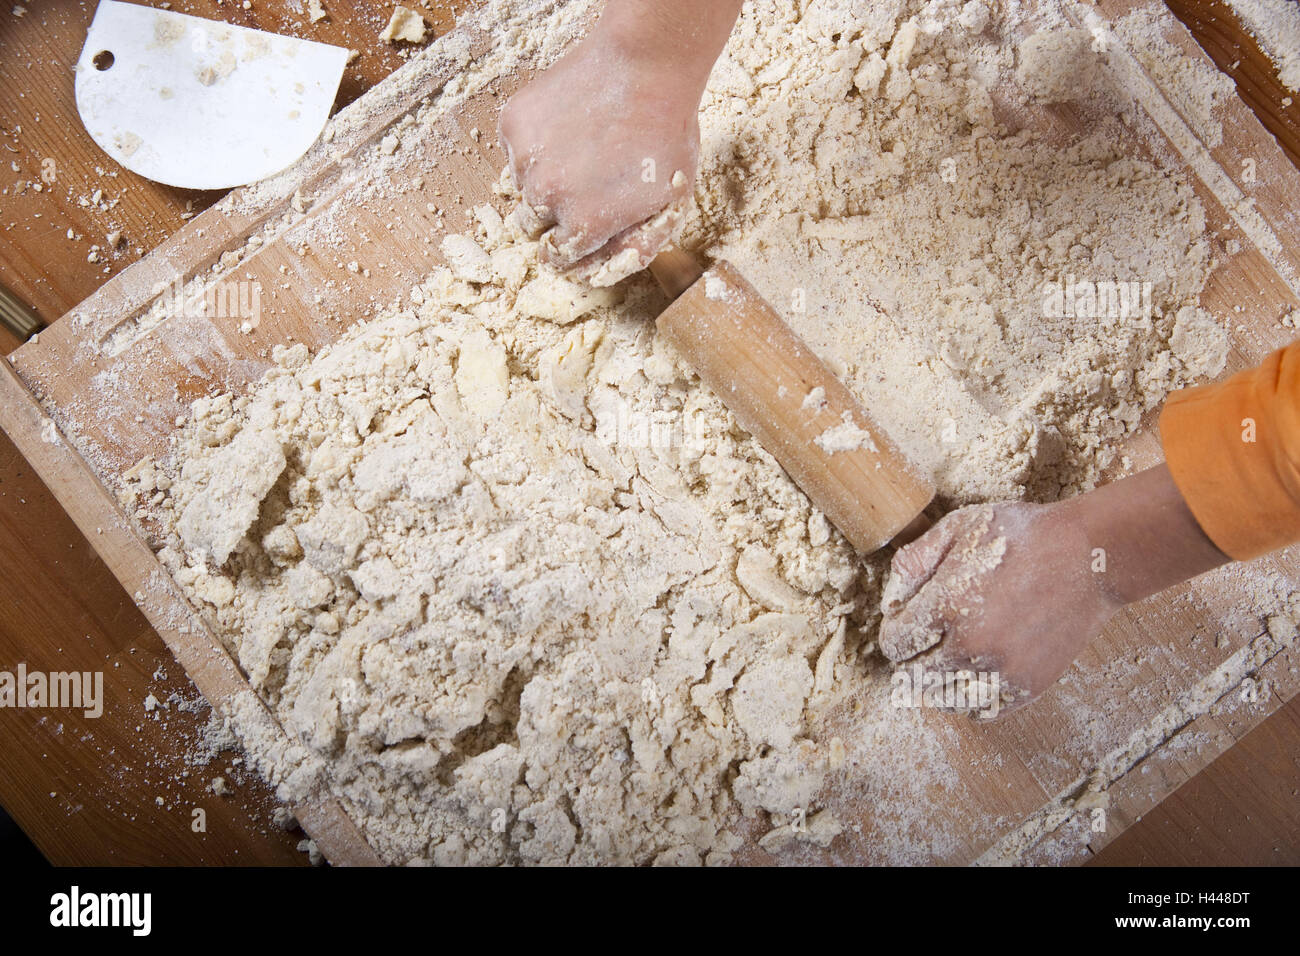 Shoes, dough, roll out, cheek ingredients, shoes, preparation, preparation, flour, sugar, cake dough, dough scooter, wooden scooter, rolling-pin, Christmas, Christmas biscuit, biscuit, cake, mix, raspatory, dough raspatory, Stock Photo